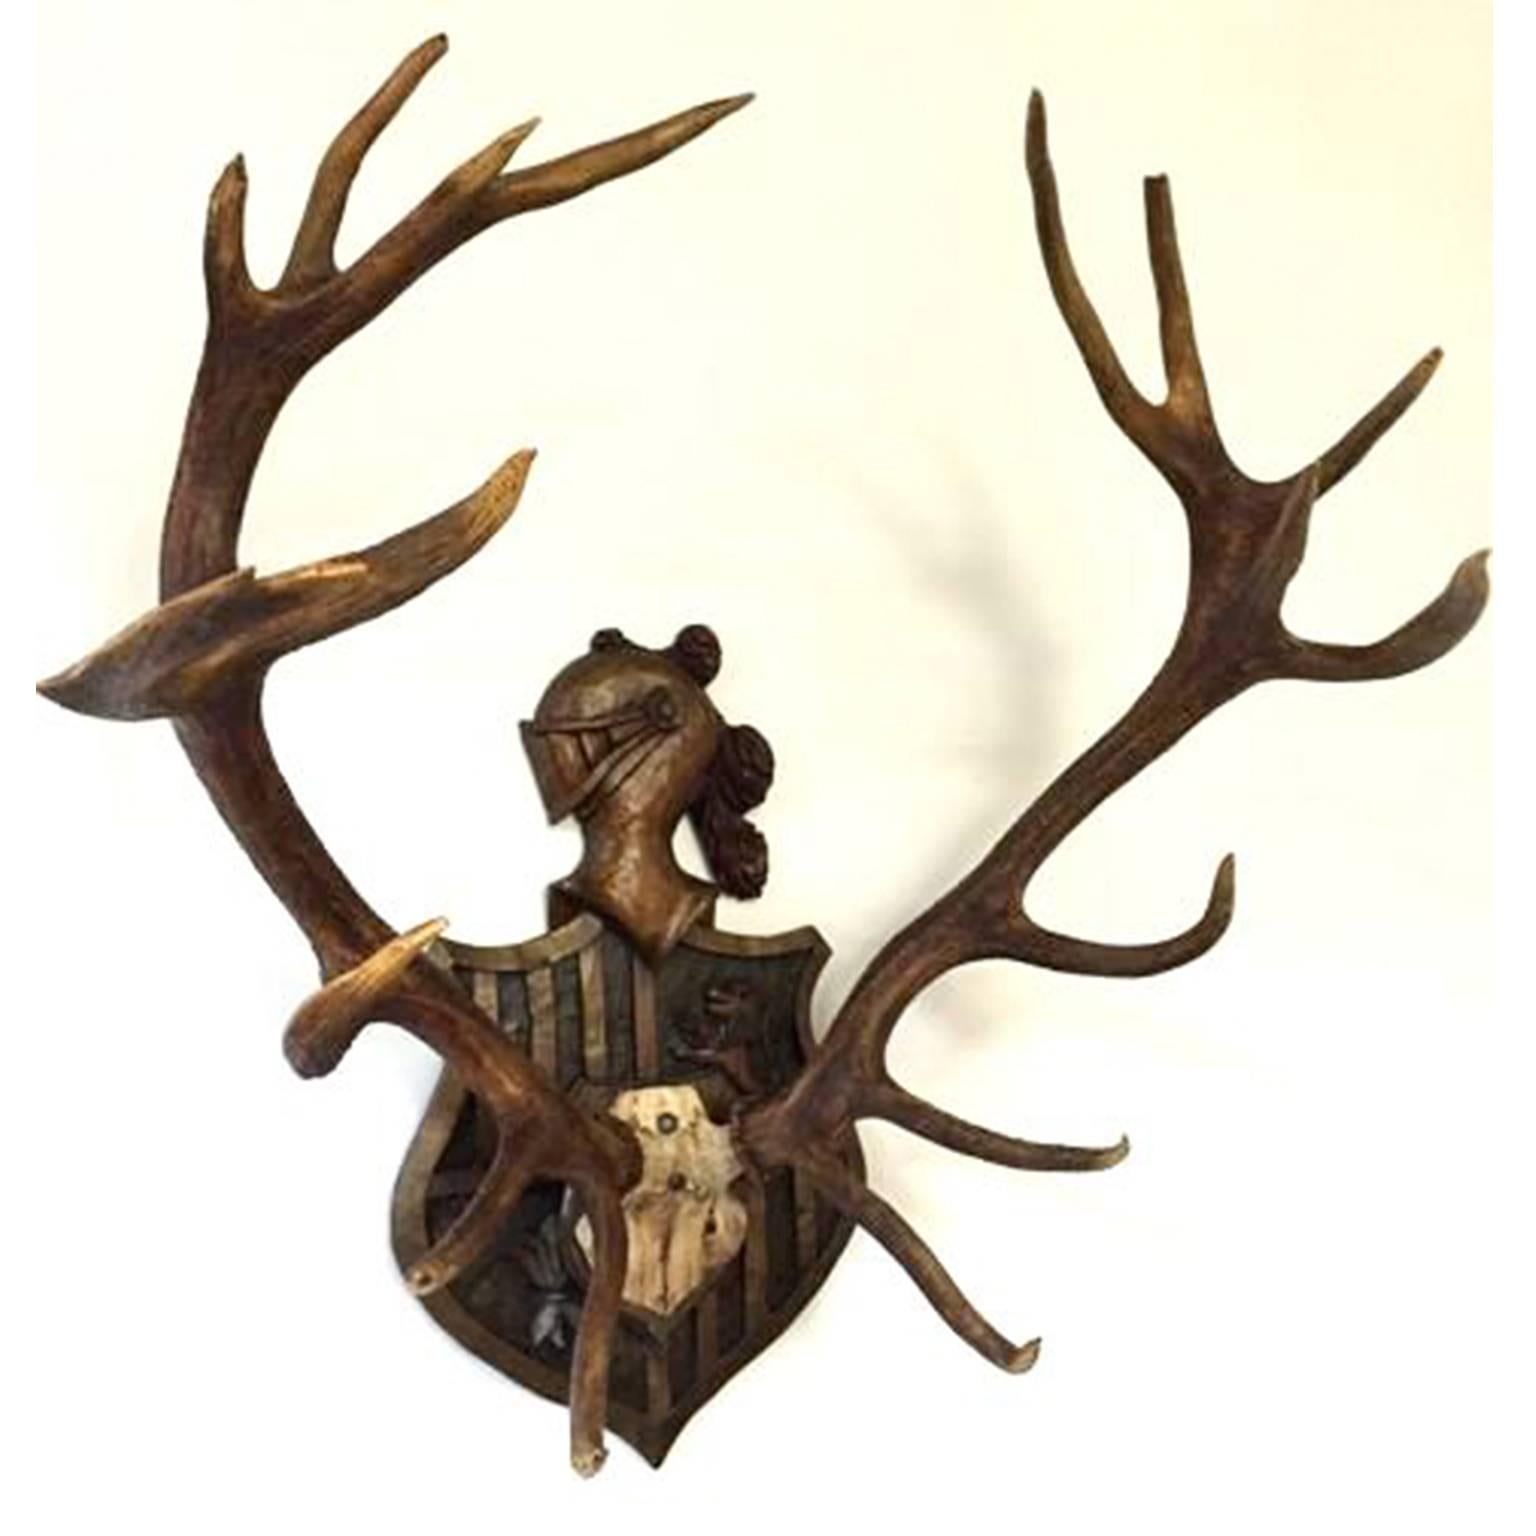 Very old red stag (when you look closely on either side of the lower attachment bolt, you can see the top of a date/year 1793) mounted on an antique heraldic French plaque.

Measures: 41